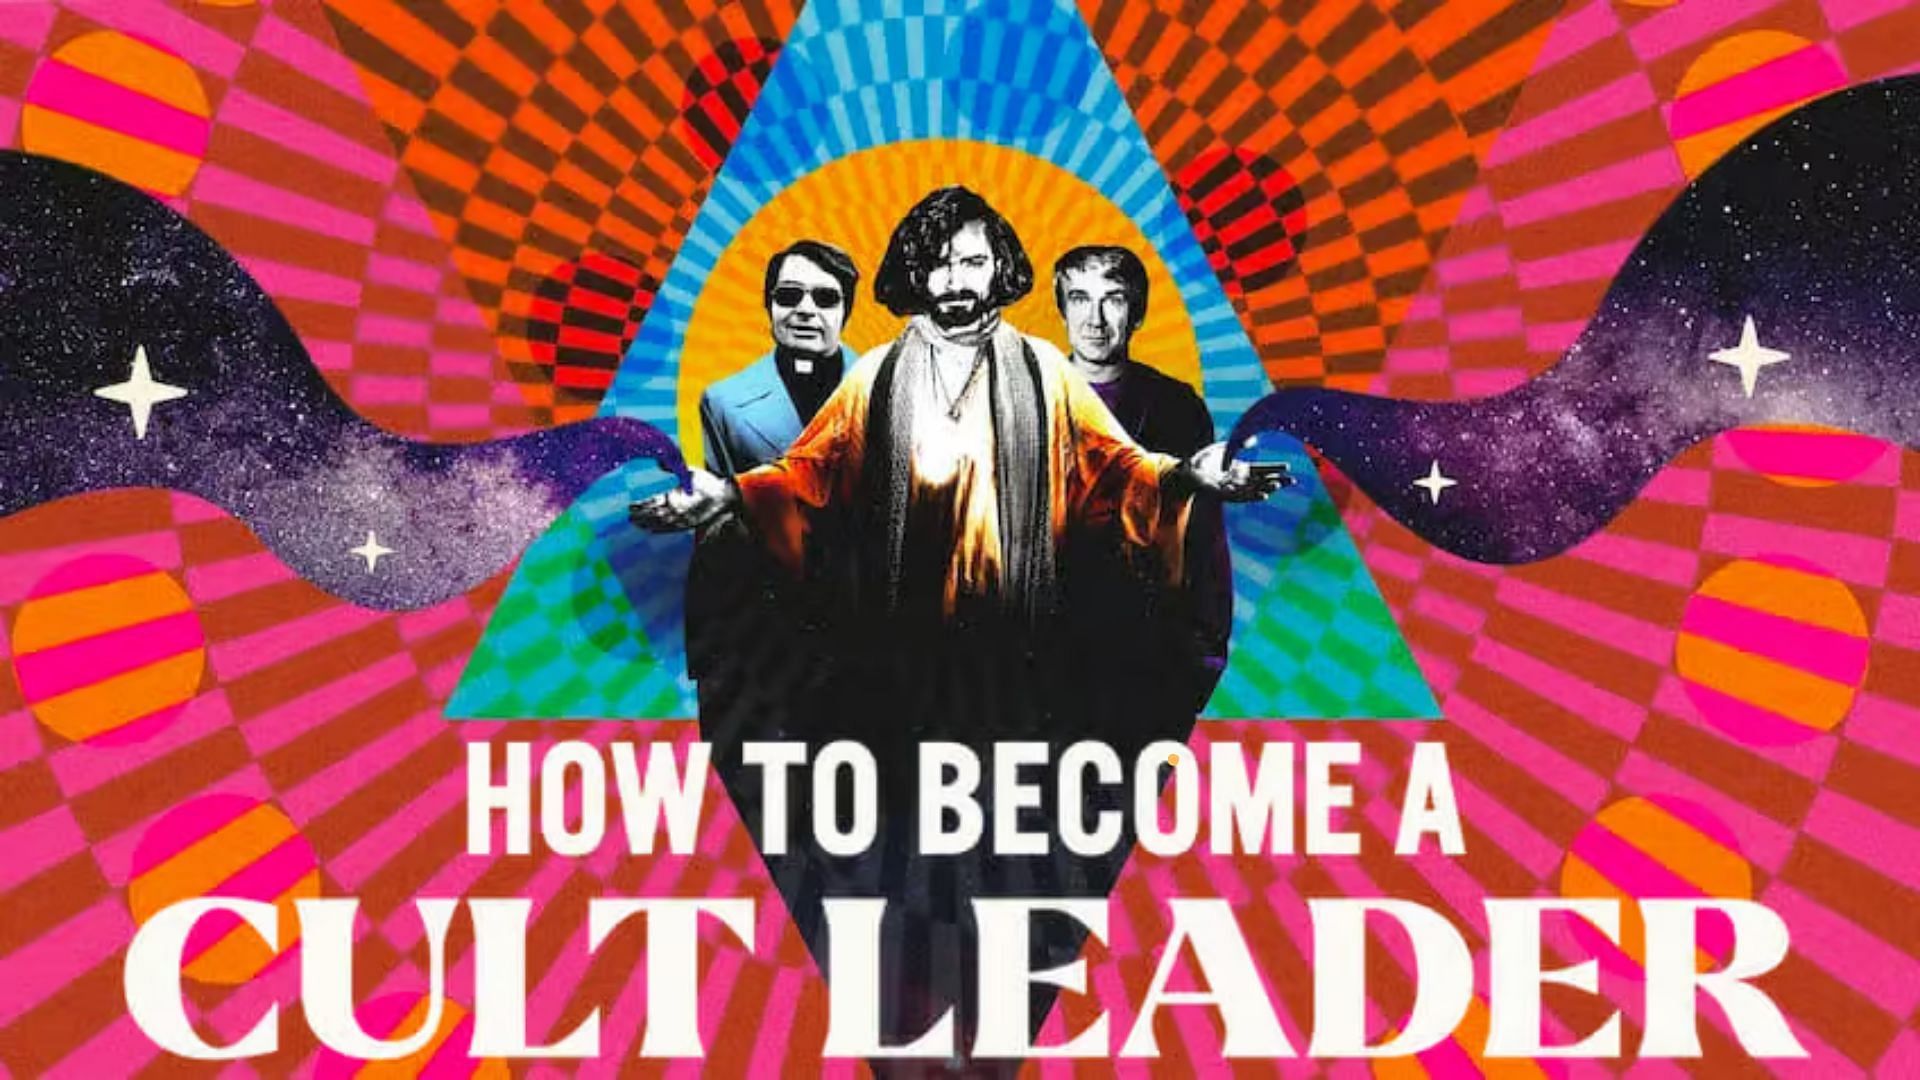 How to Become a Cult Leader airing on July 28 (Image via Netflix)